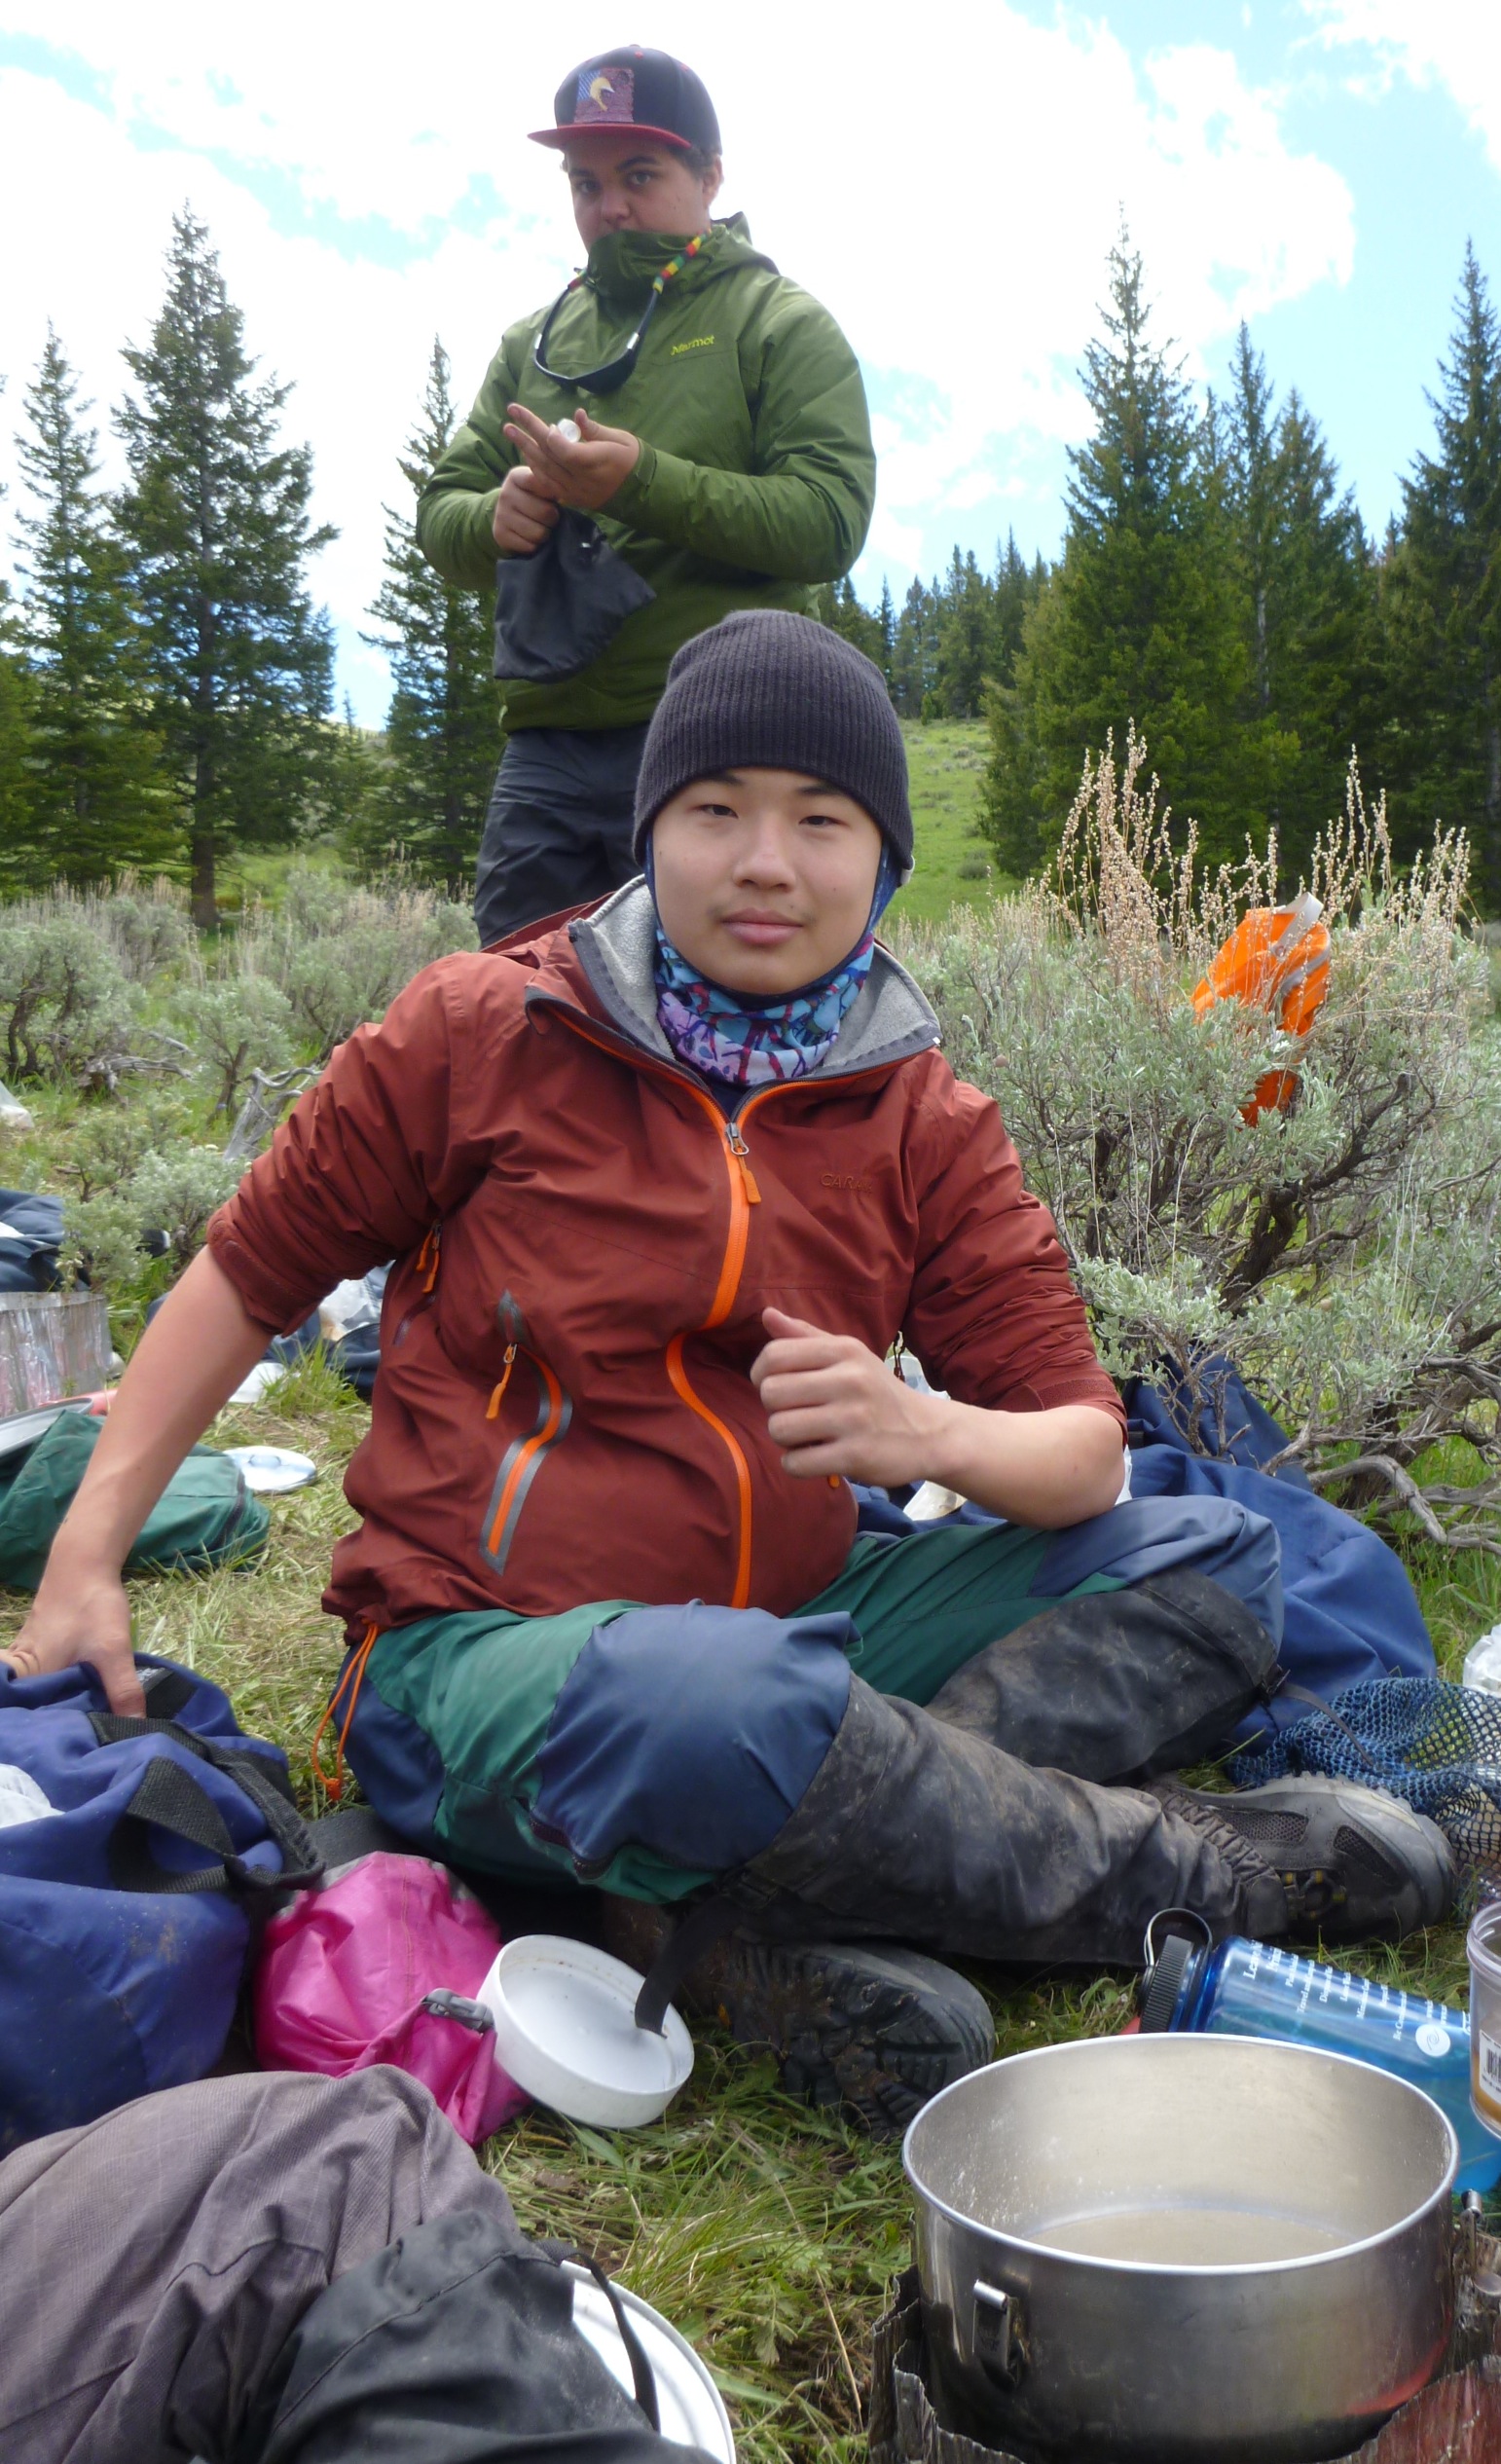 One student traveled in Montana wilderness.